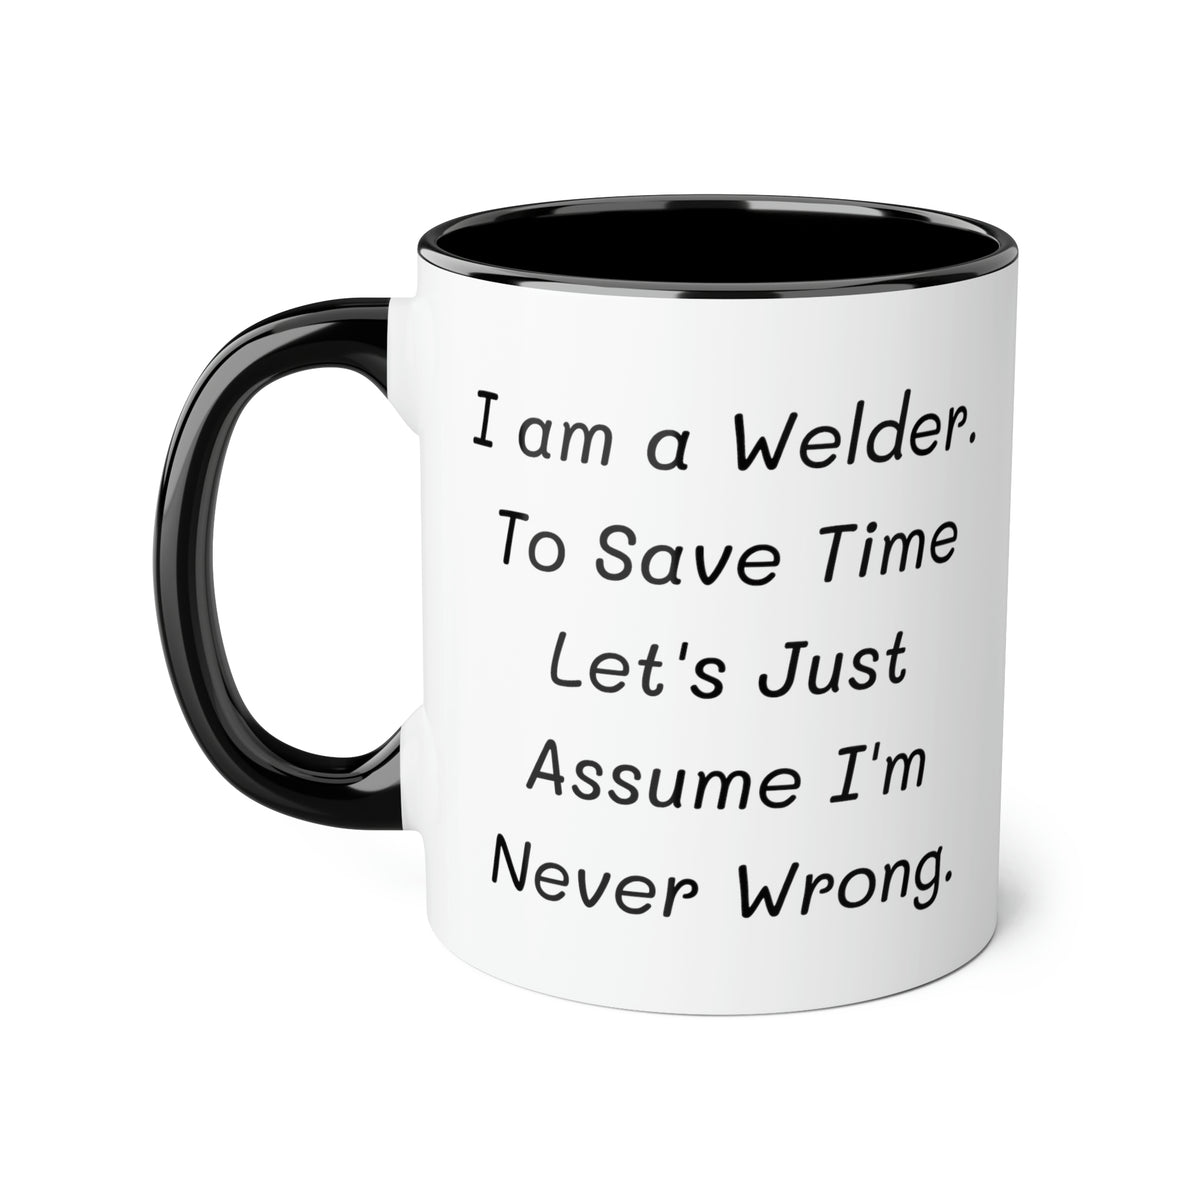 Unique Idea Welder Gifts, I am a Welder. To Save Time Let's Just, Welder Two Tone 11oz Mug From Colleagues, Cup For Coworkers, Welding cup, Welder mug, Welding coffee mug, Welding tea cup, Welder gift